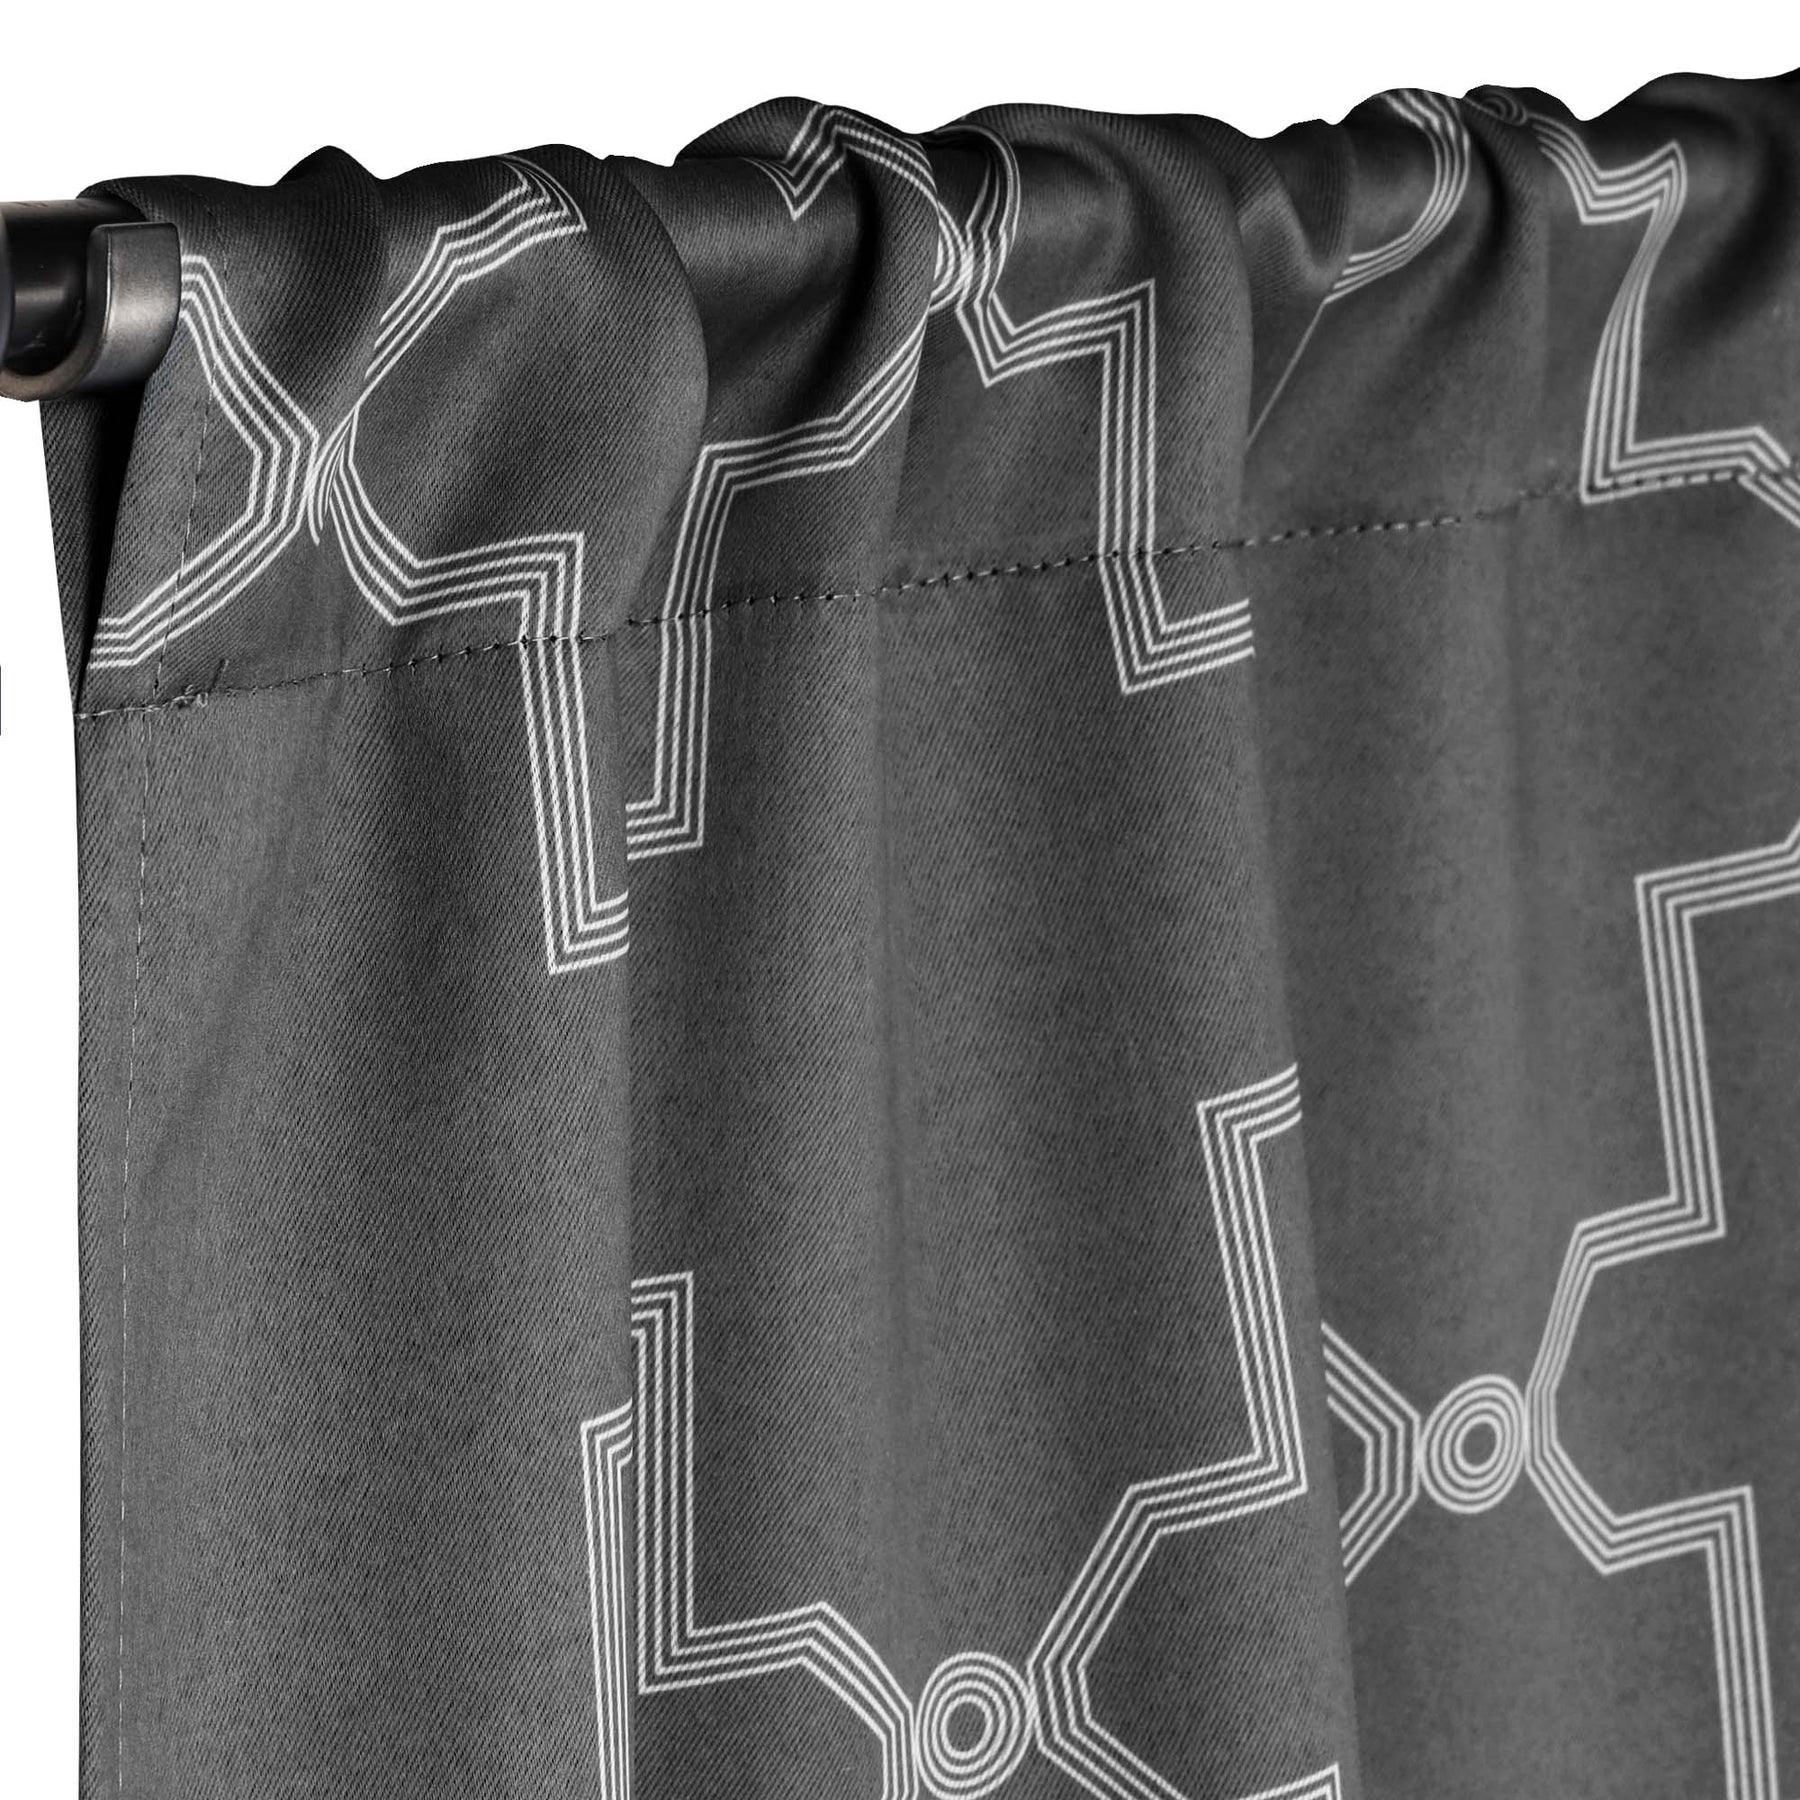 Superior Imperial Trellis Blackout Curtain Set of 2 Panels -  Charcoal